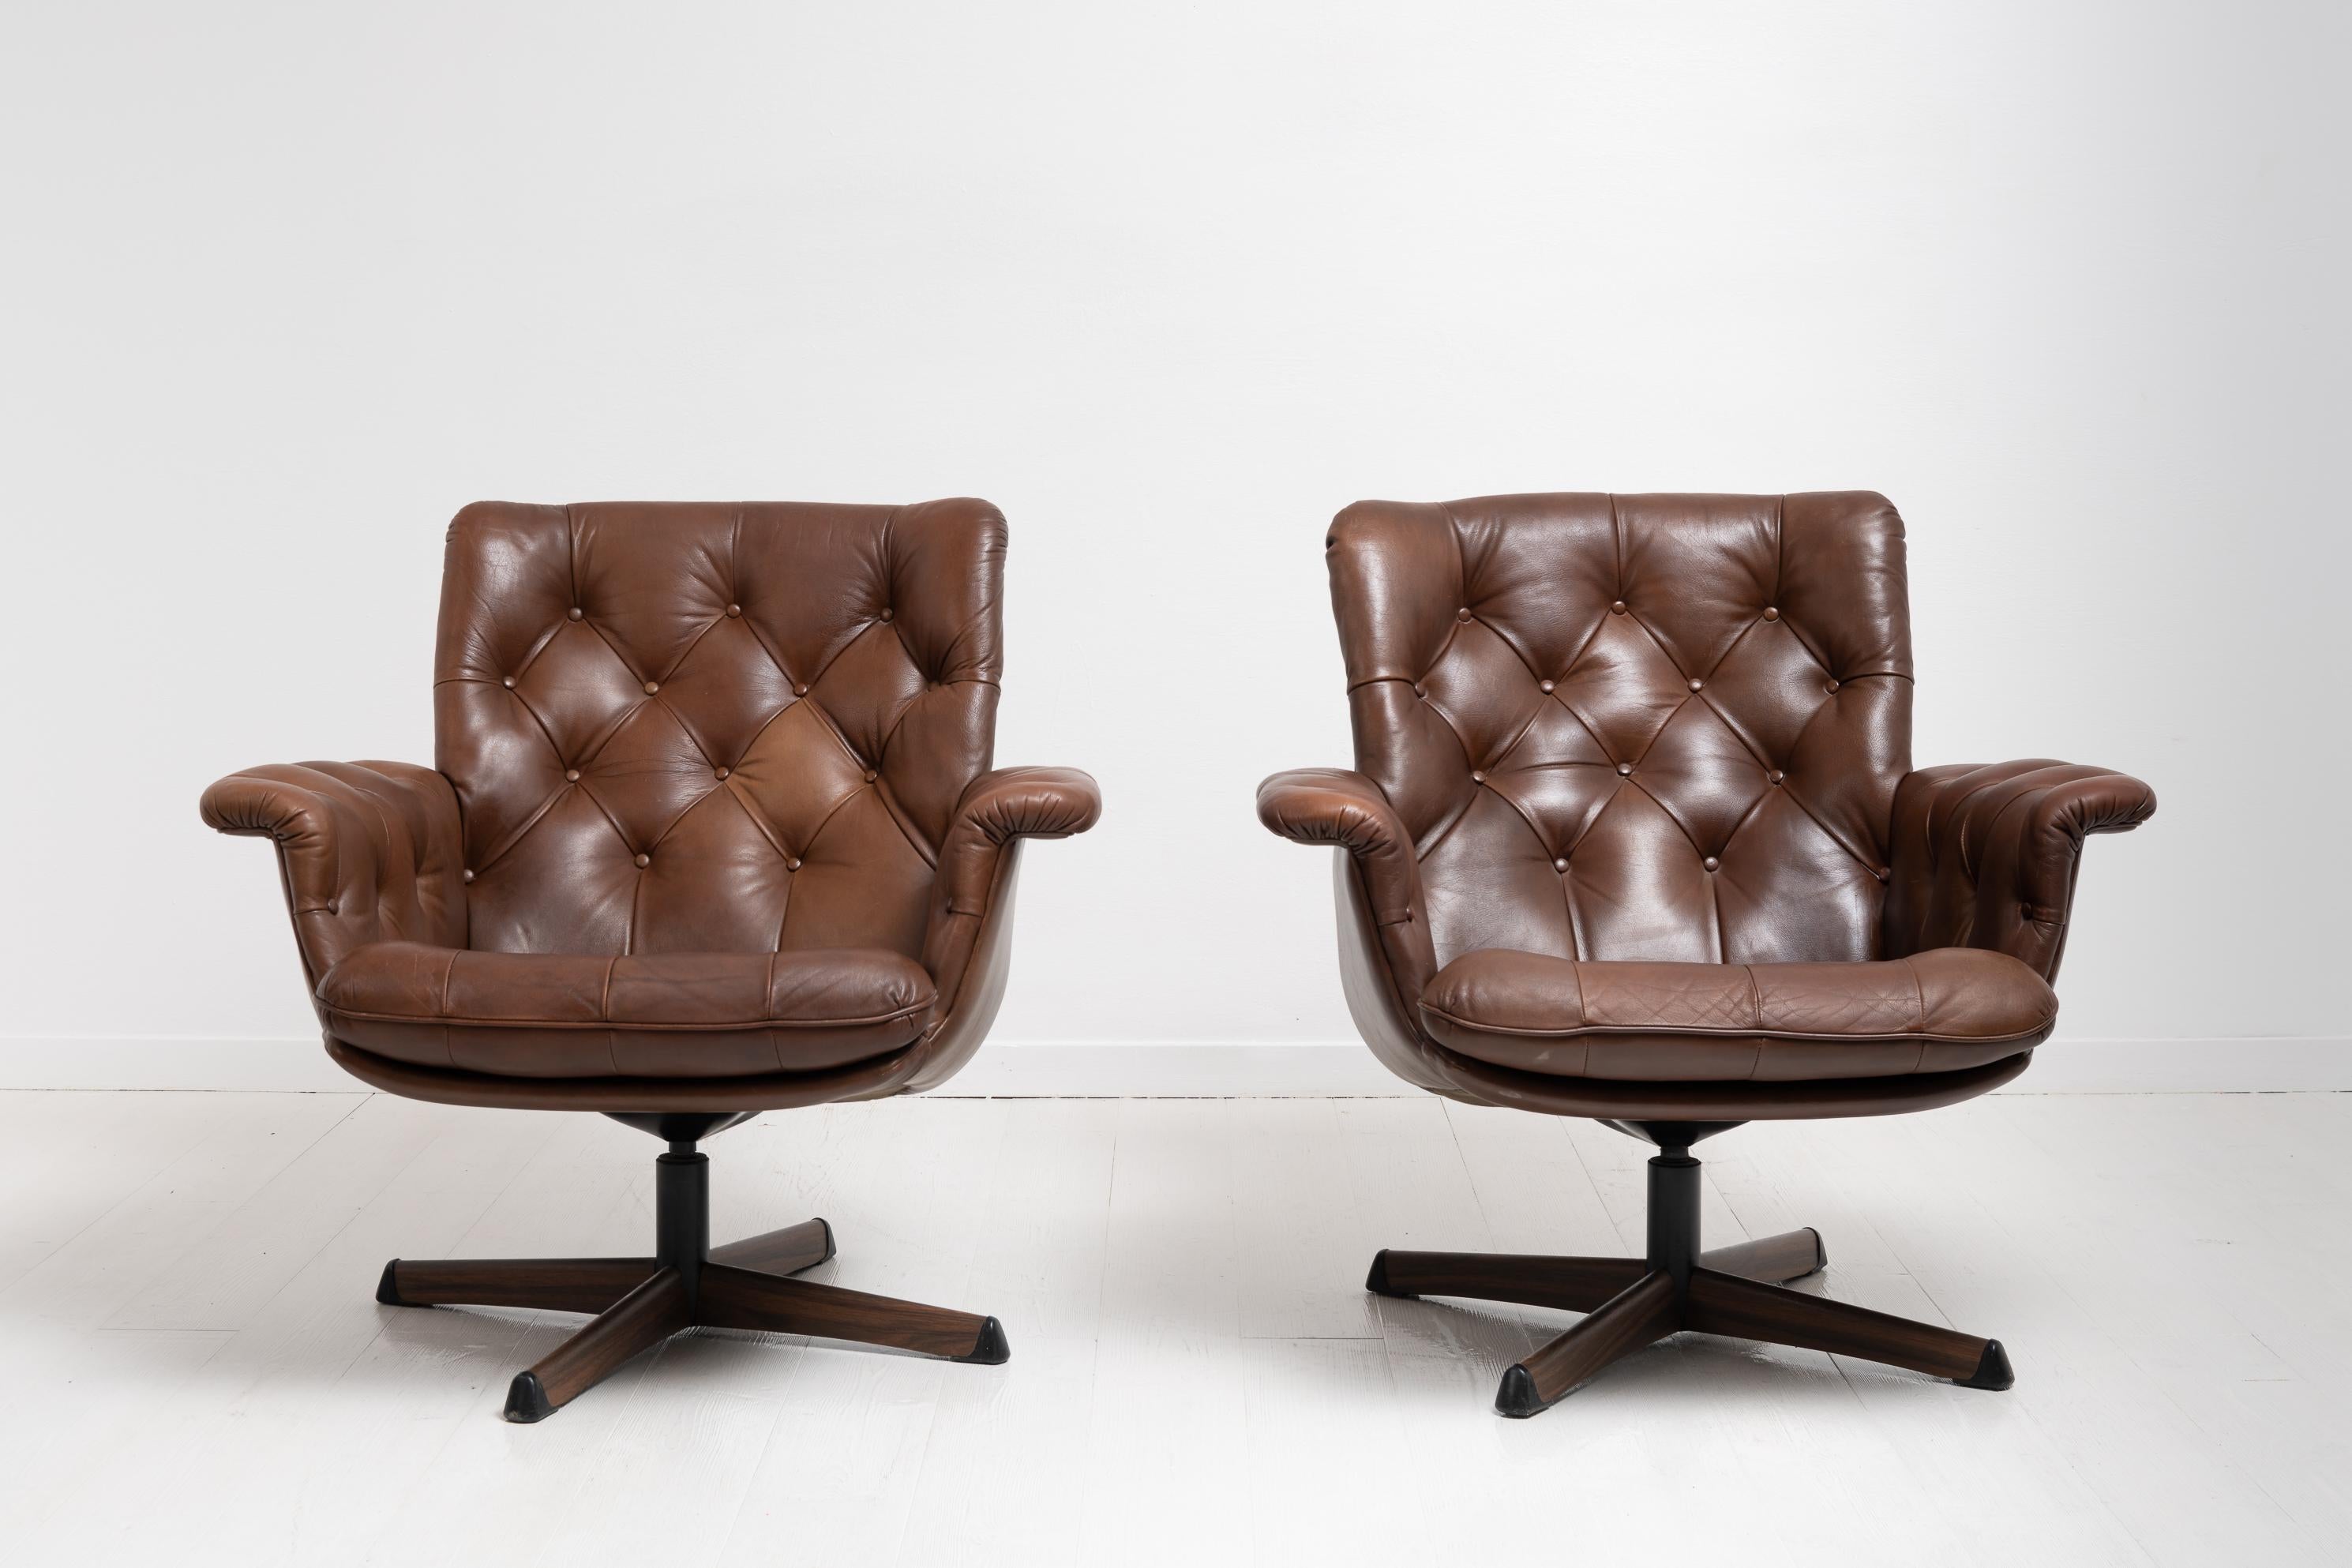 Pair of Mid-Century Modern armchairs in dark brown leather for G-möbler Nässjö. The chairs are from the 1960s with brown leather. They have a metal foot and are revolving. Loose seat cushion. The chairs are in good vintage condition consistent with